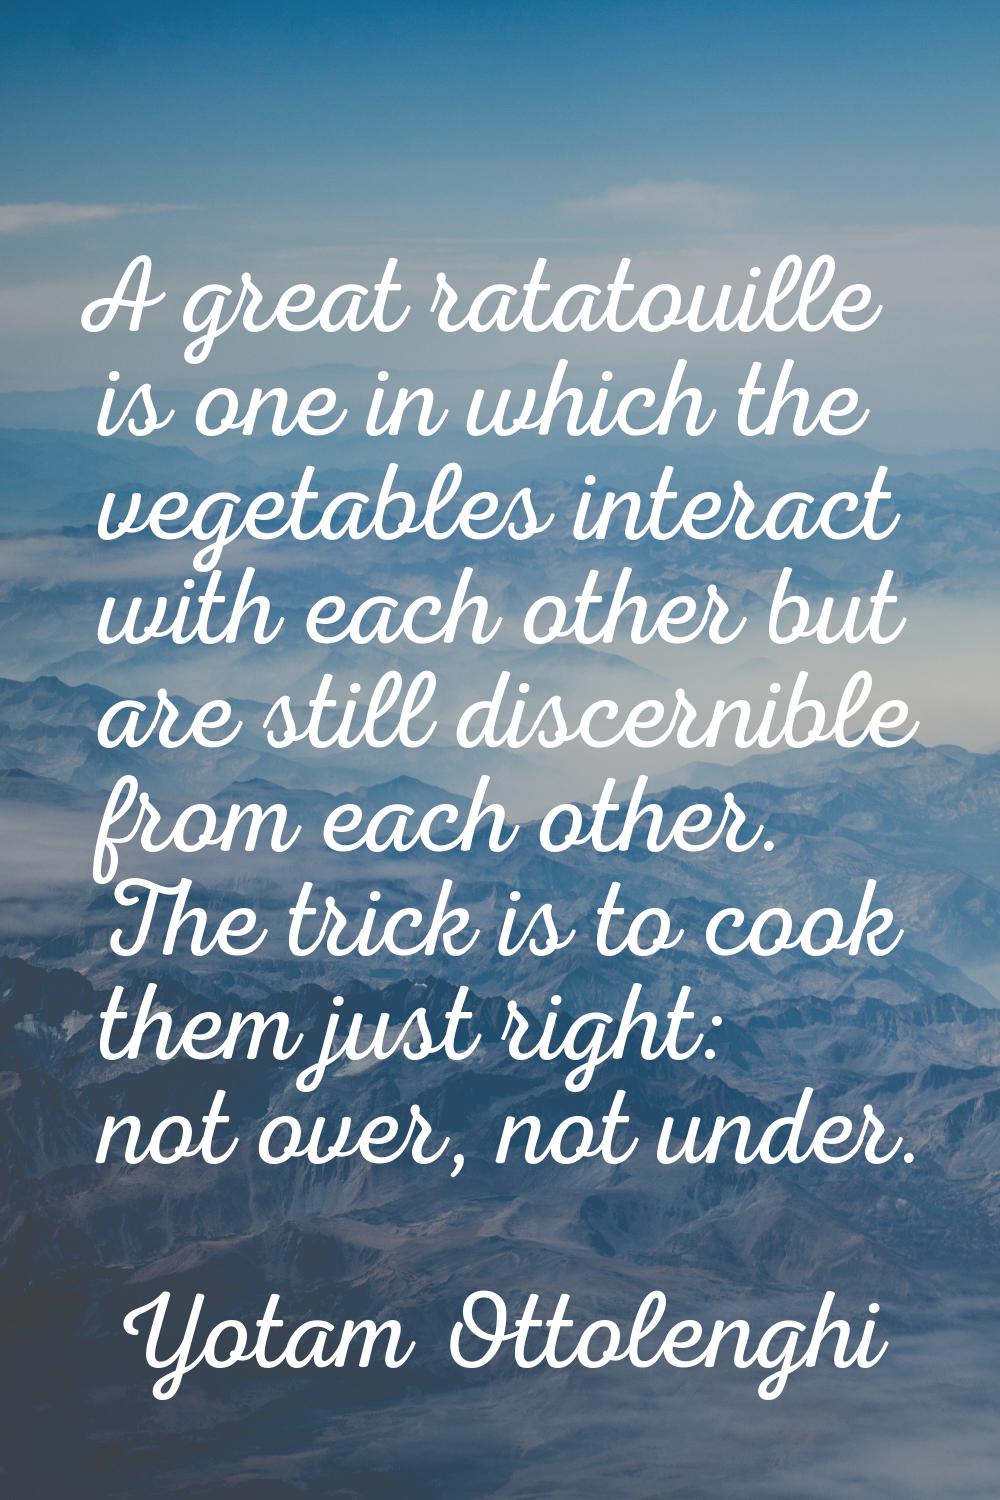 A great ratatouille is one in which the vegetables interact with each other but are still discernib